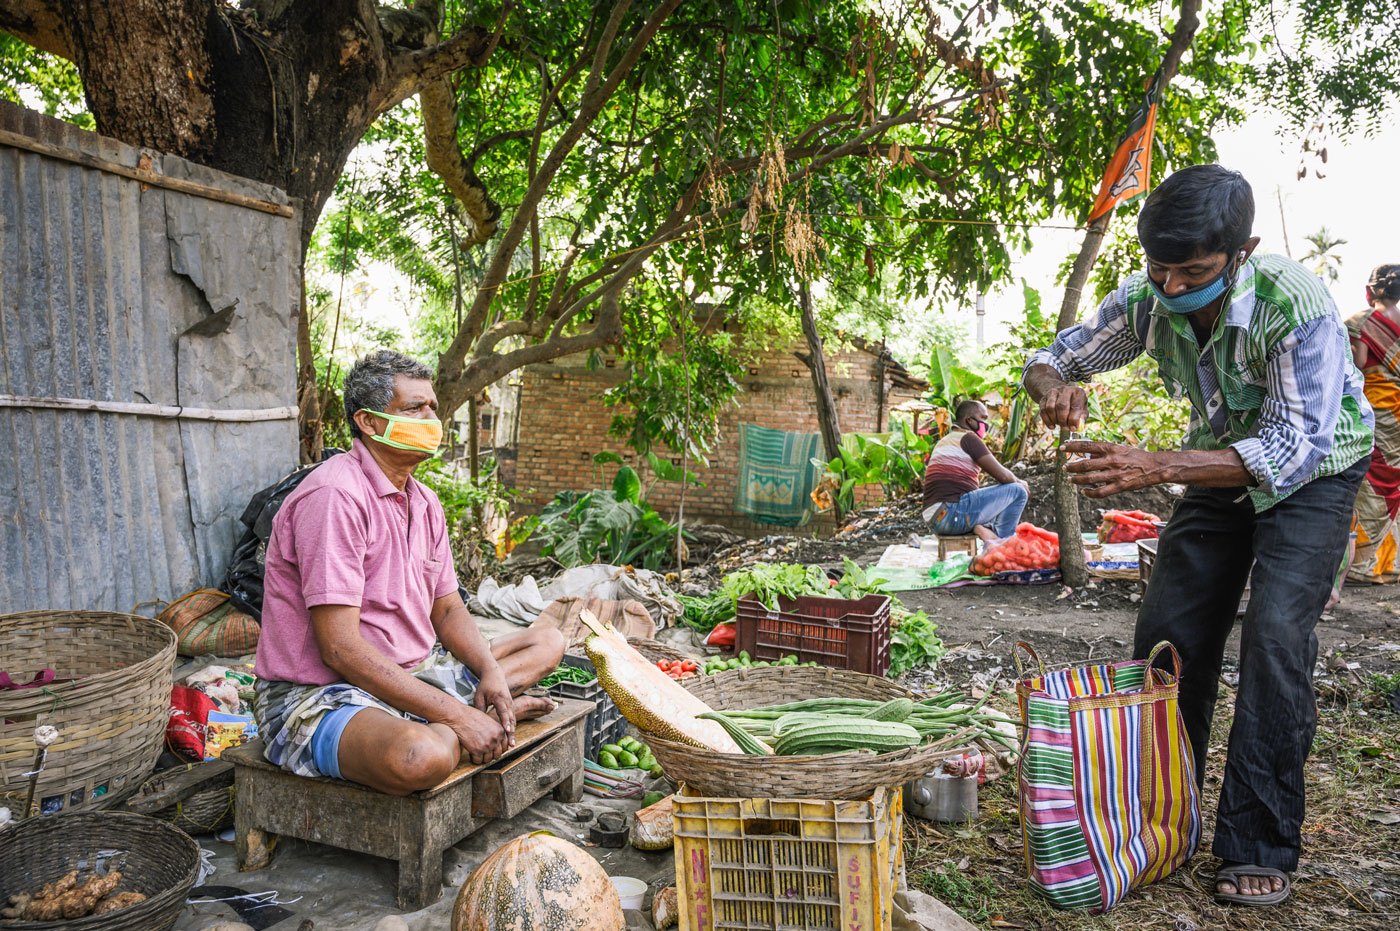 Ram Dutta, a 56-year-old vegetable seller, buying lemon tea from Santi Halder. His income has dropped to half his daily earnings of Rs. 300. He says, “I didn't have a lot of sales before, now it's even worse.” Santi Halder, 48, has been selling jhal muri (a popular street food in West Bengal) for 20 years, but with lockdown restrictions on cooked food, is selling tea. His income too has dropped from Rs. 250-300 to Rs. 100-120 a day.

